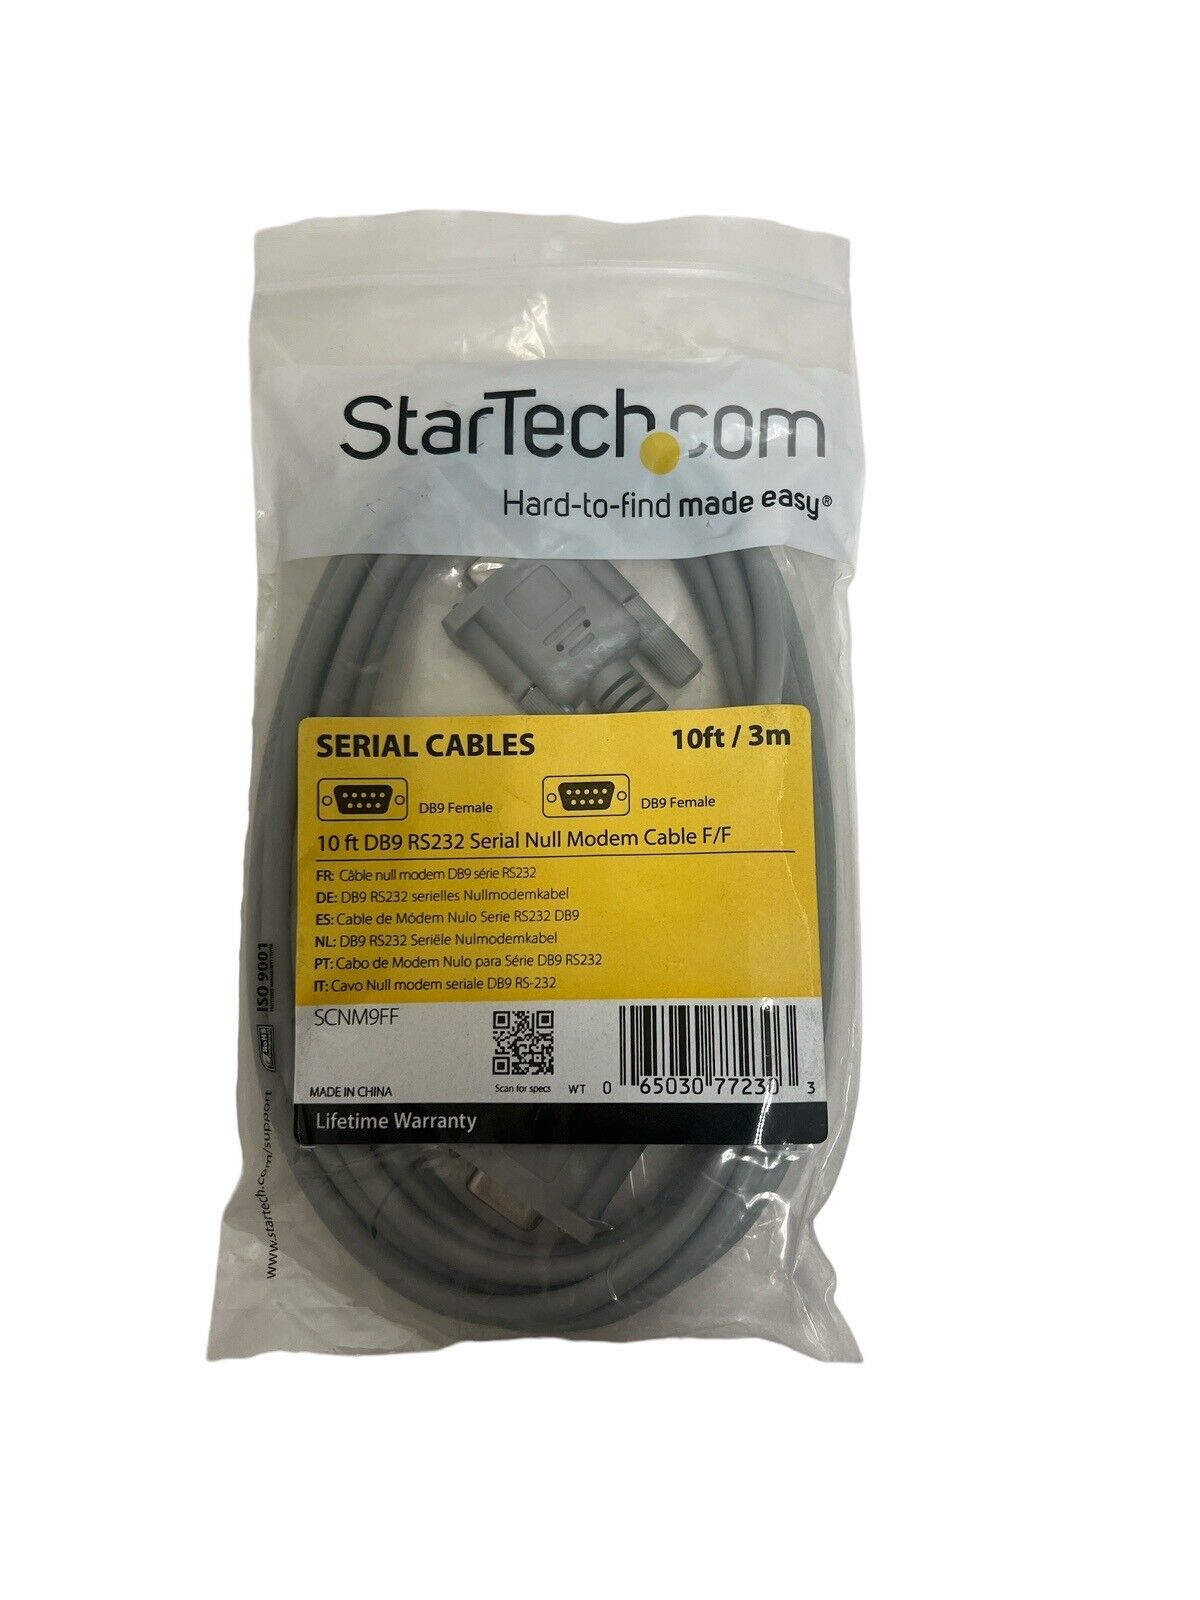 Startech.com 10ft D89 Rs-232 Serial Null Modem Cable